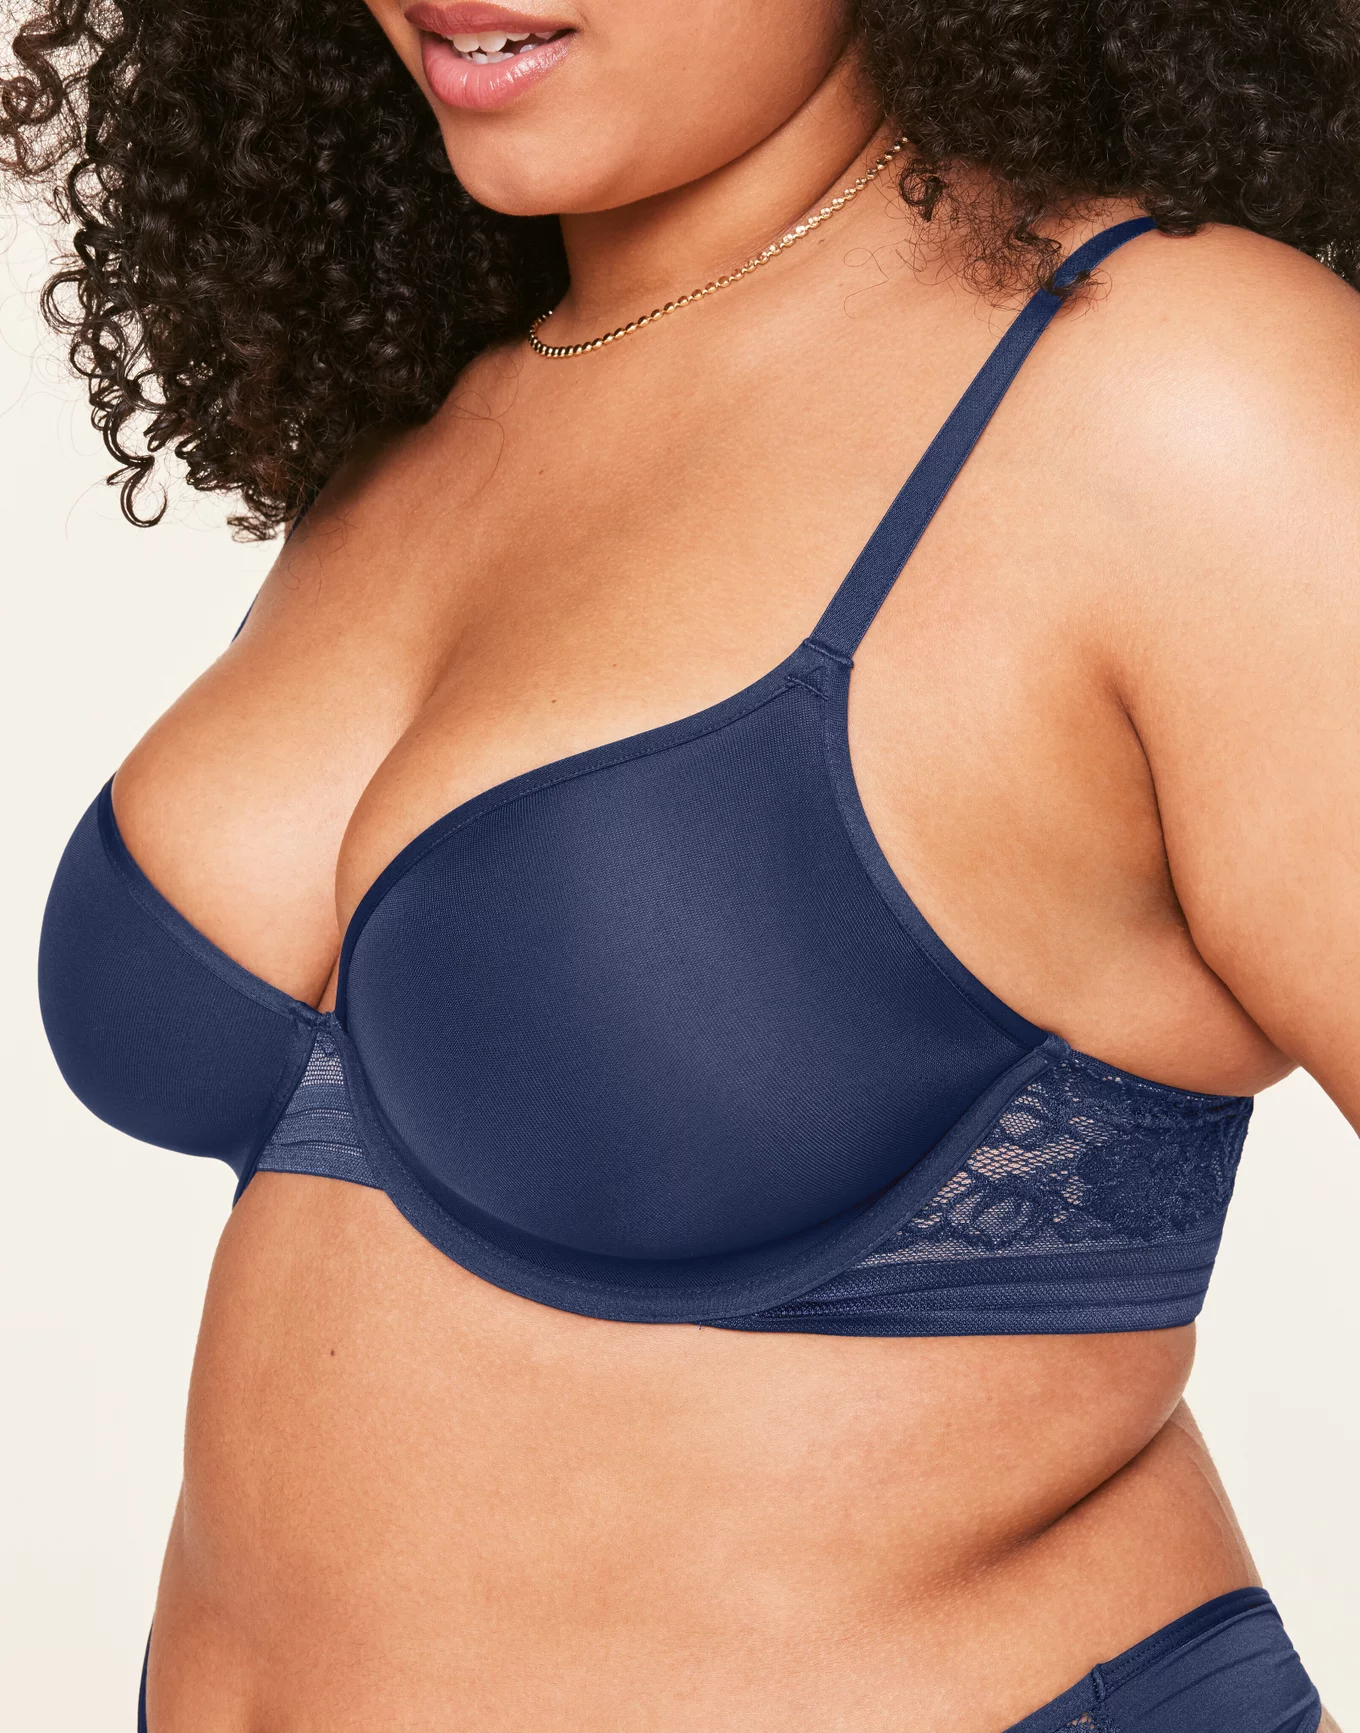 Buy LOVERS CONTOUR BRA online at Intimo